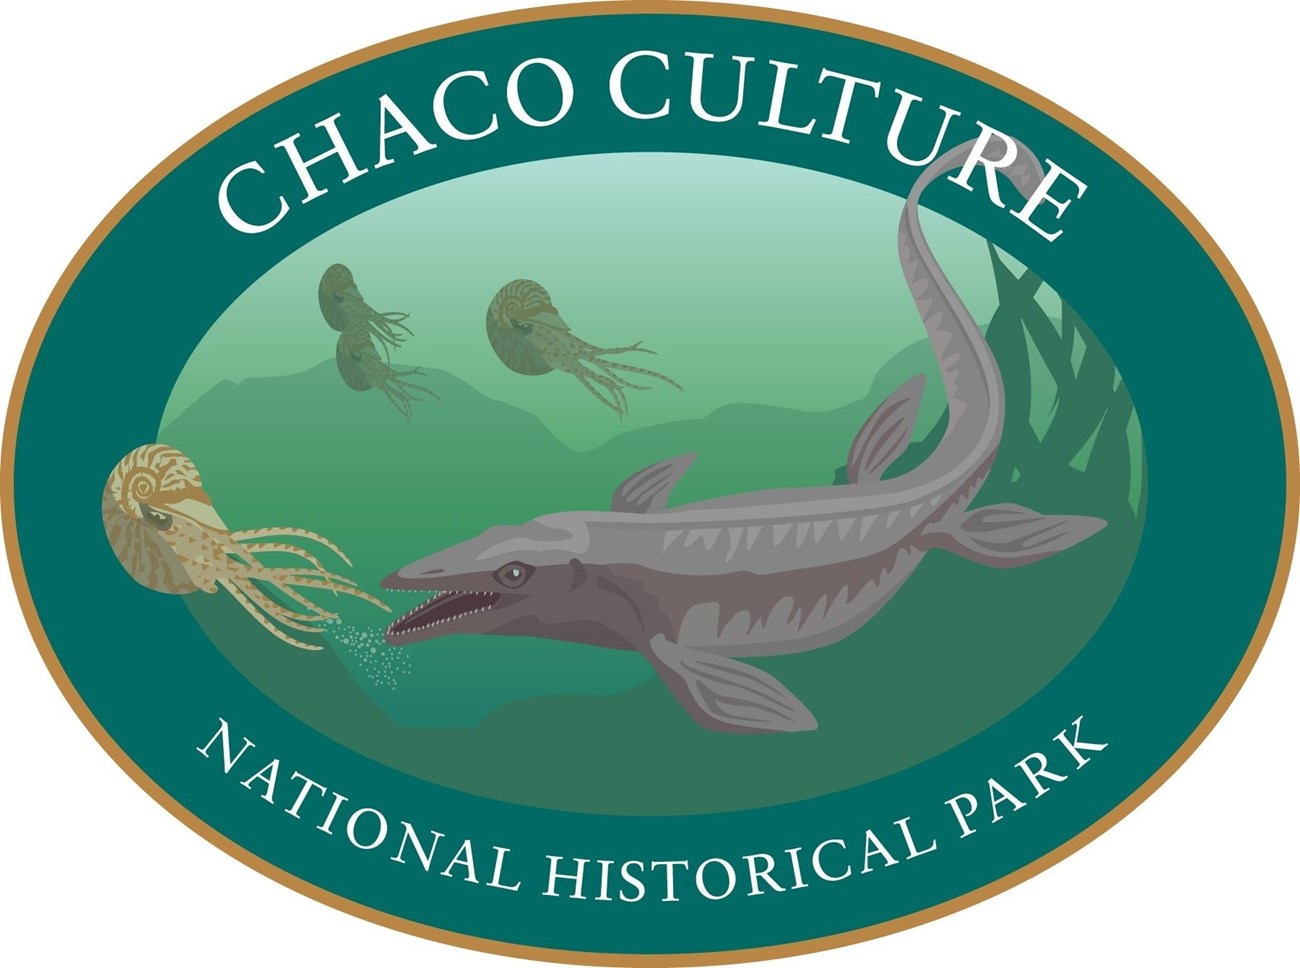 This logo depicts late Cretaceous period sea life.